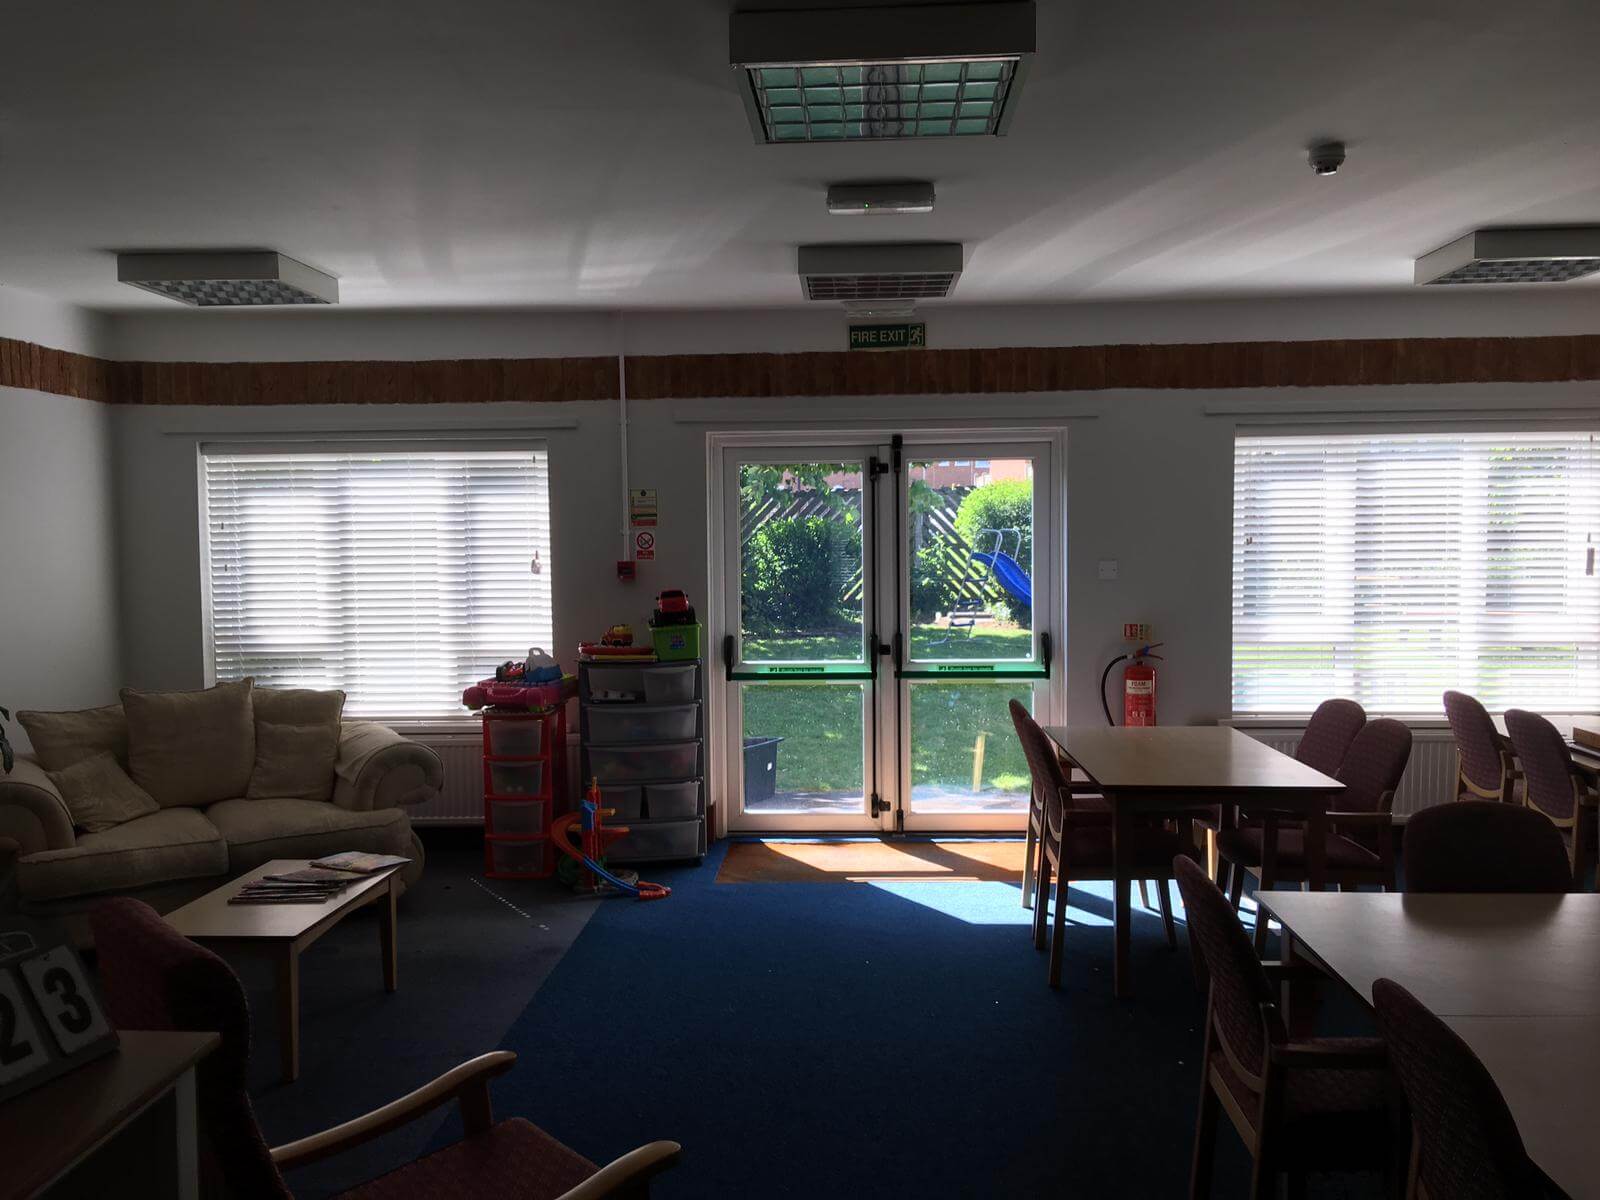 Commercial Blinds For Care Homes Beeston